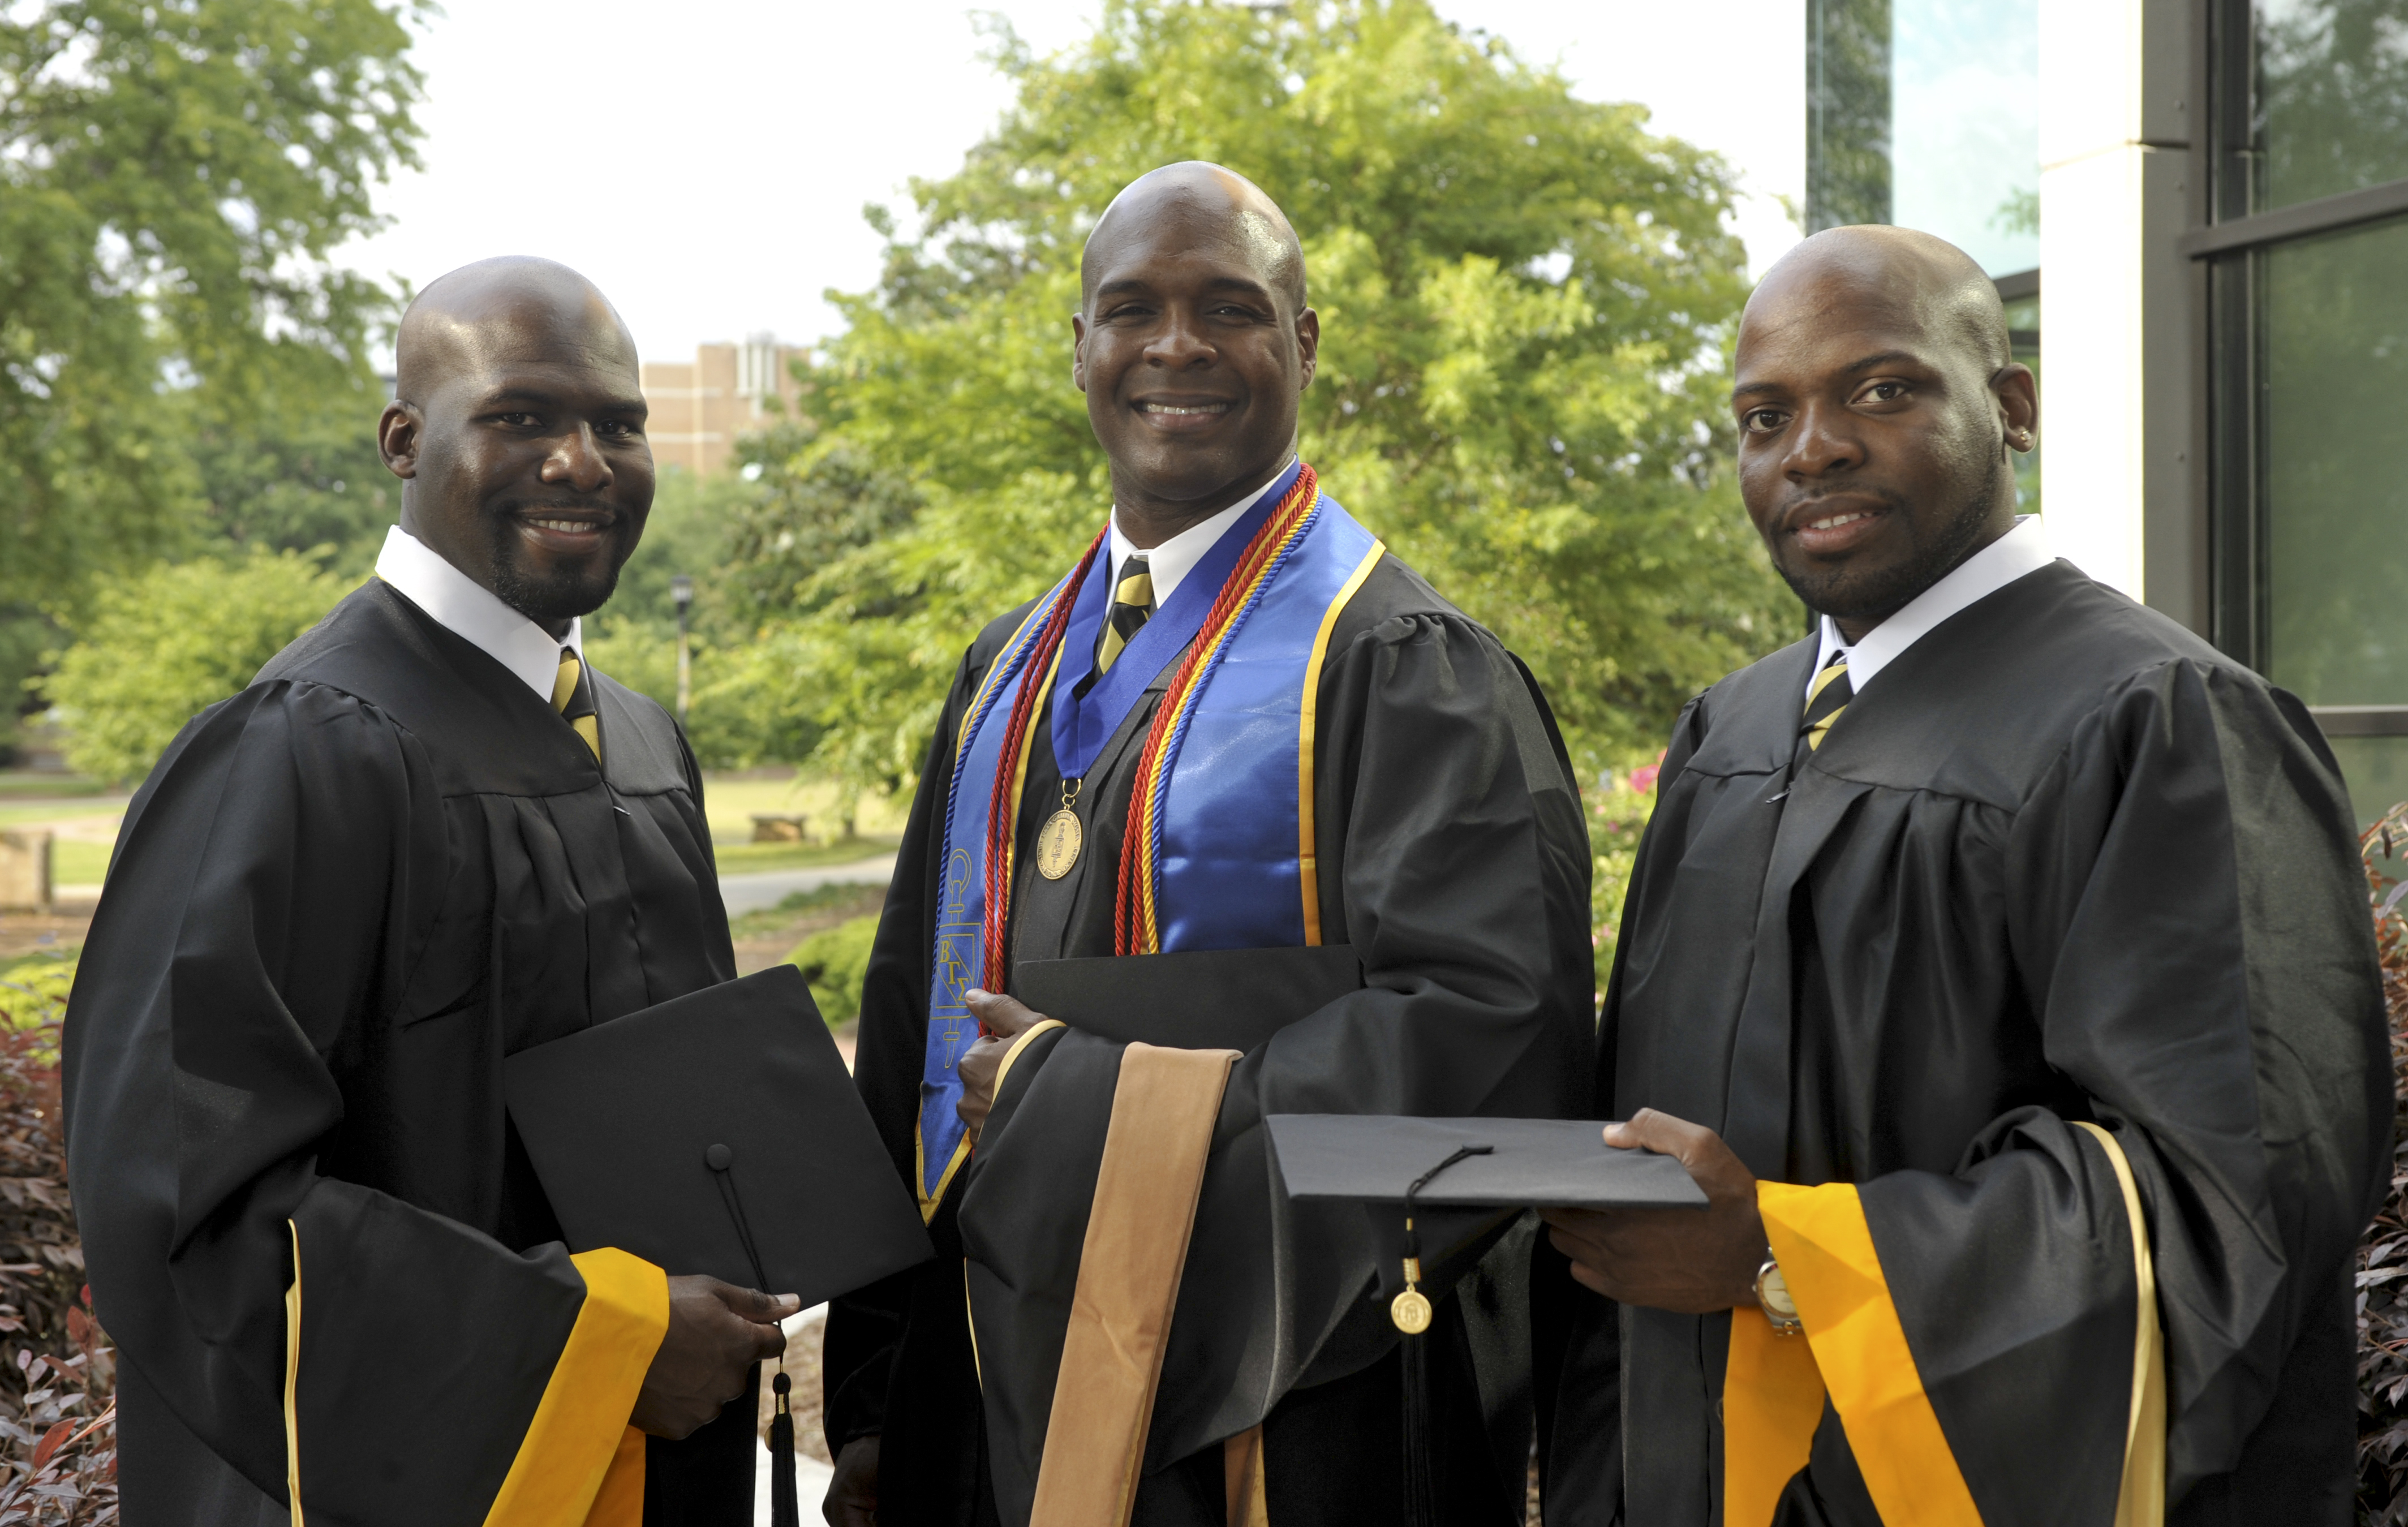 Brothers Miguel Tricoche and Leland and Matthew Walcott, of St. Croix, receive master’s degrees from Kennesaw State.